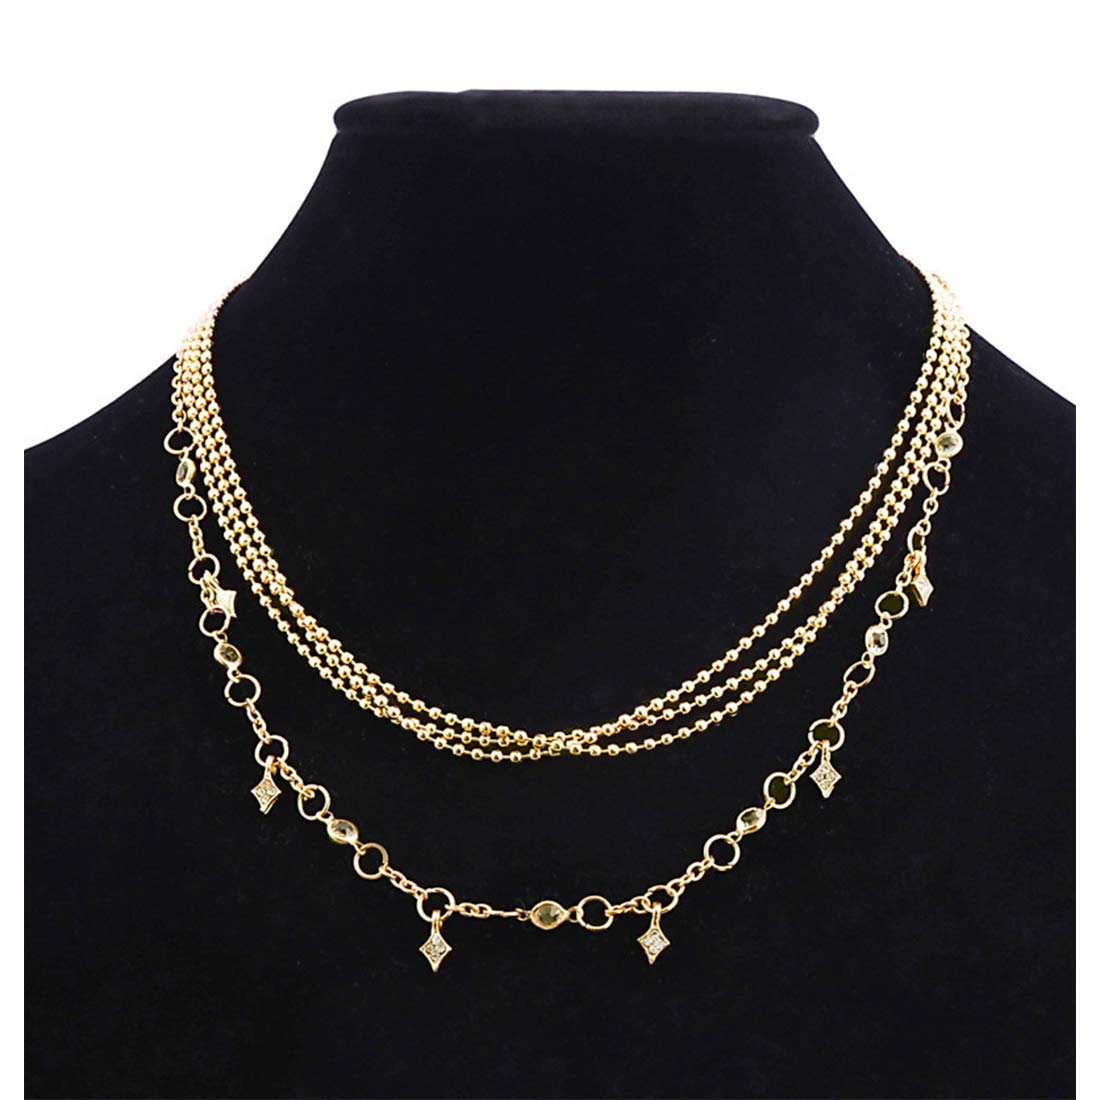 Yellow Chimes Trendy Fashion Multilayer Gold Toned Crystal Drop Choker Necklace for Women and Girls